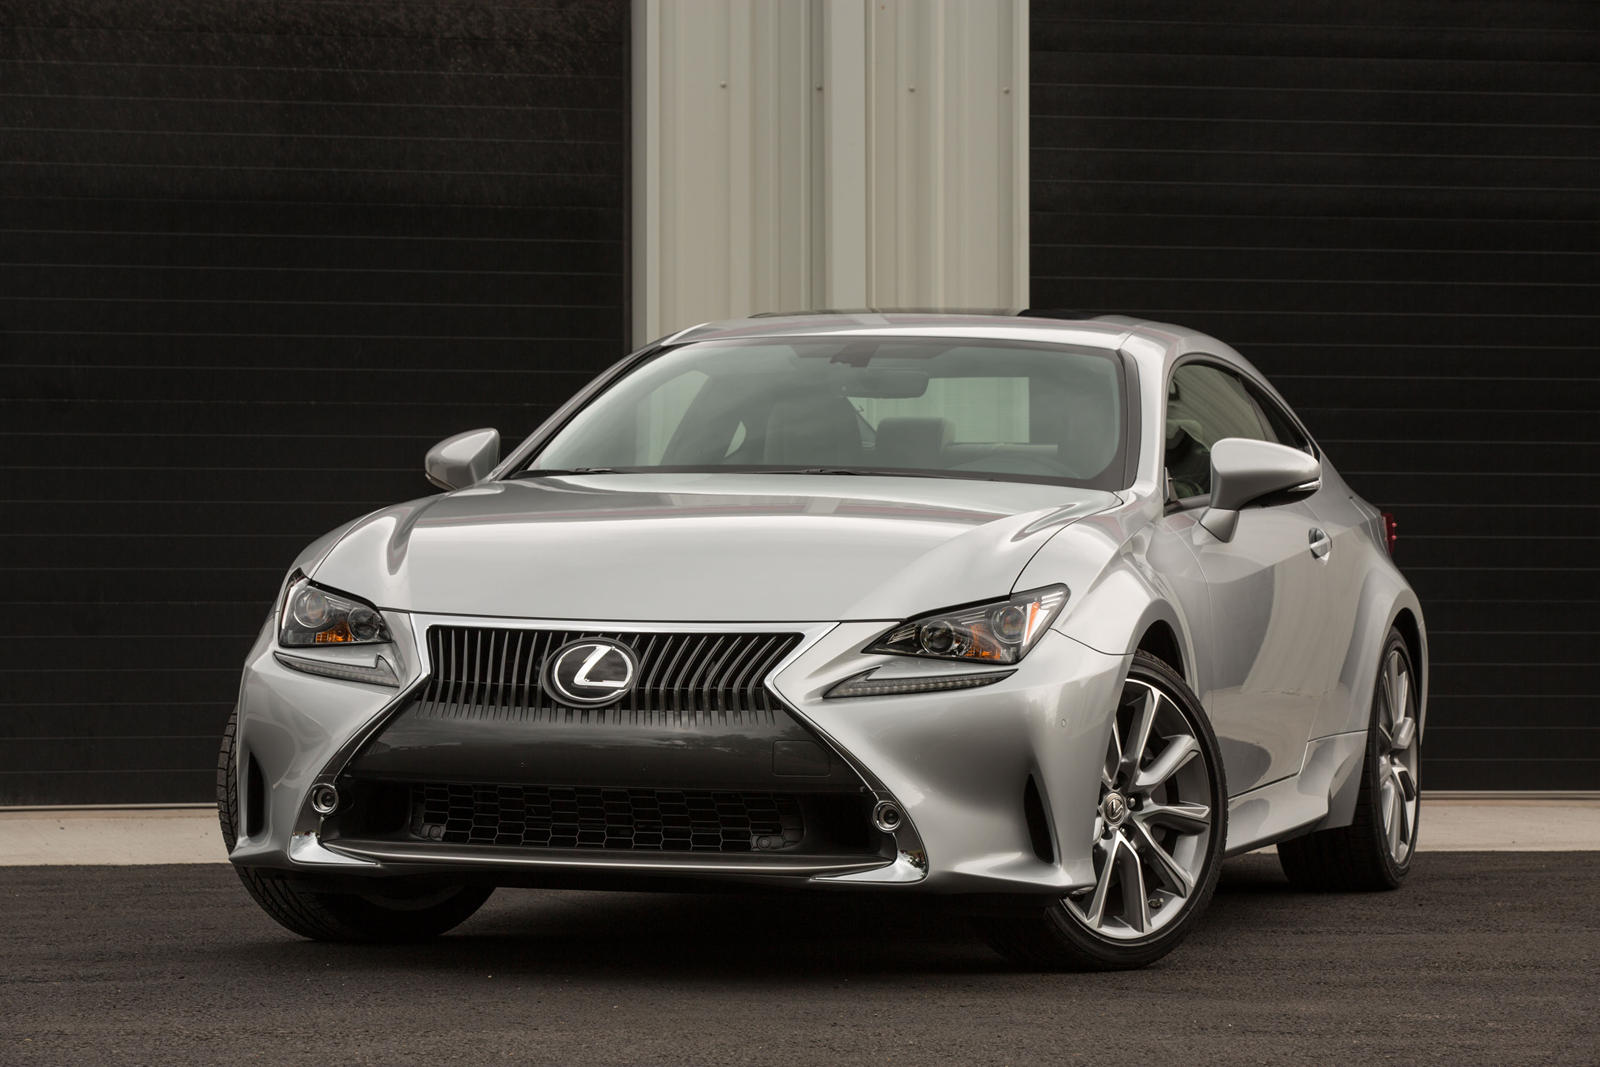 2018 Lexus RC Front Angle View